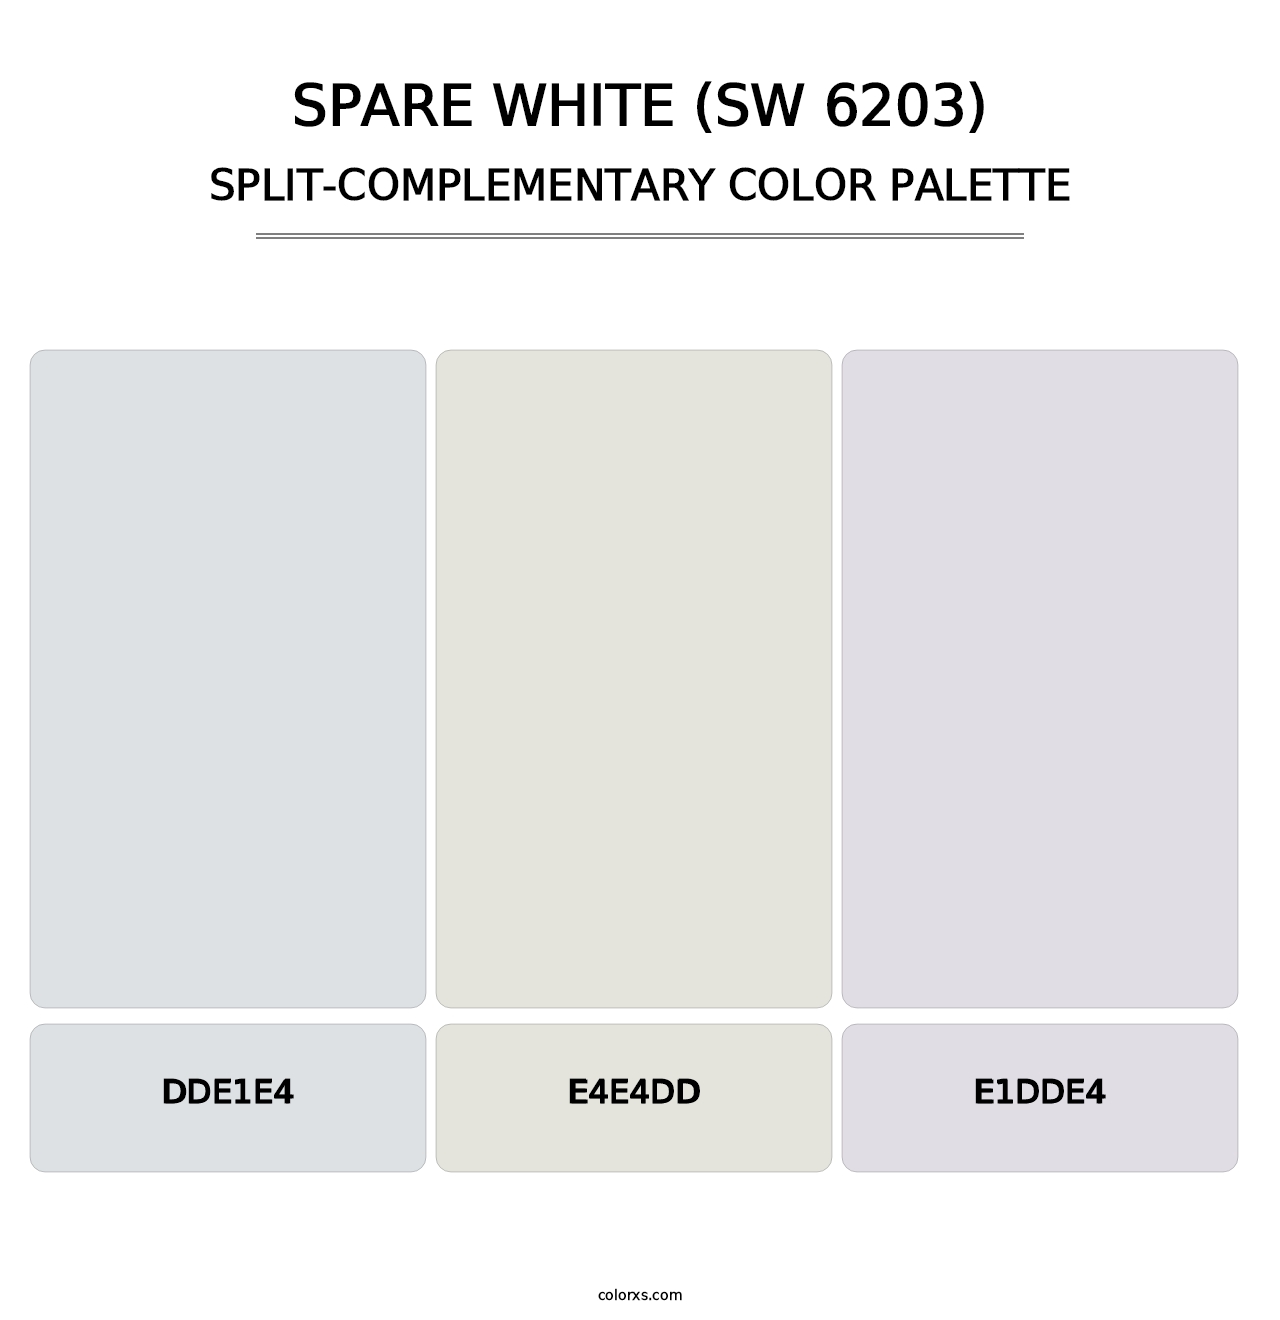 Spare White (SW 6203) - Split-Complementary Color Palette